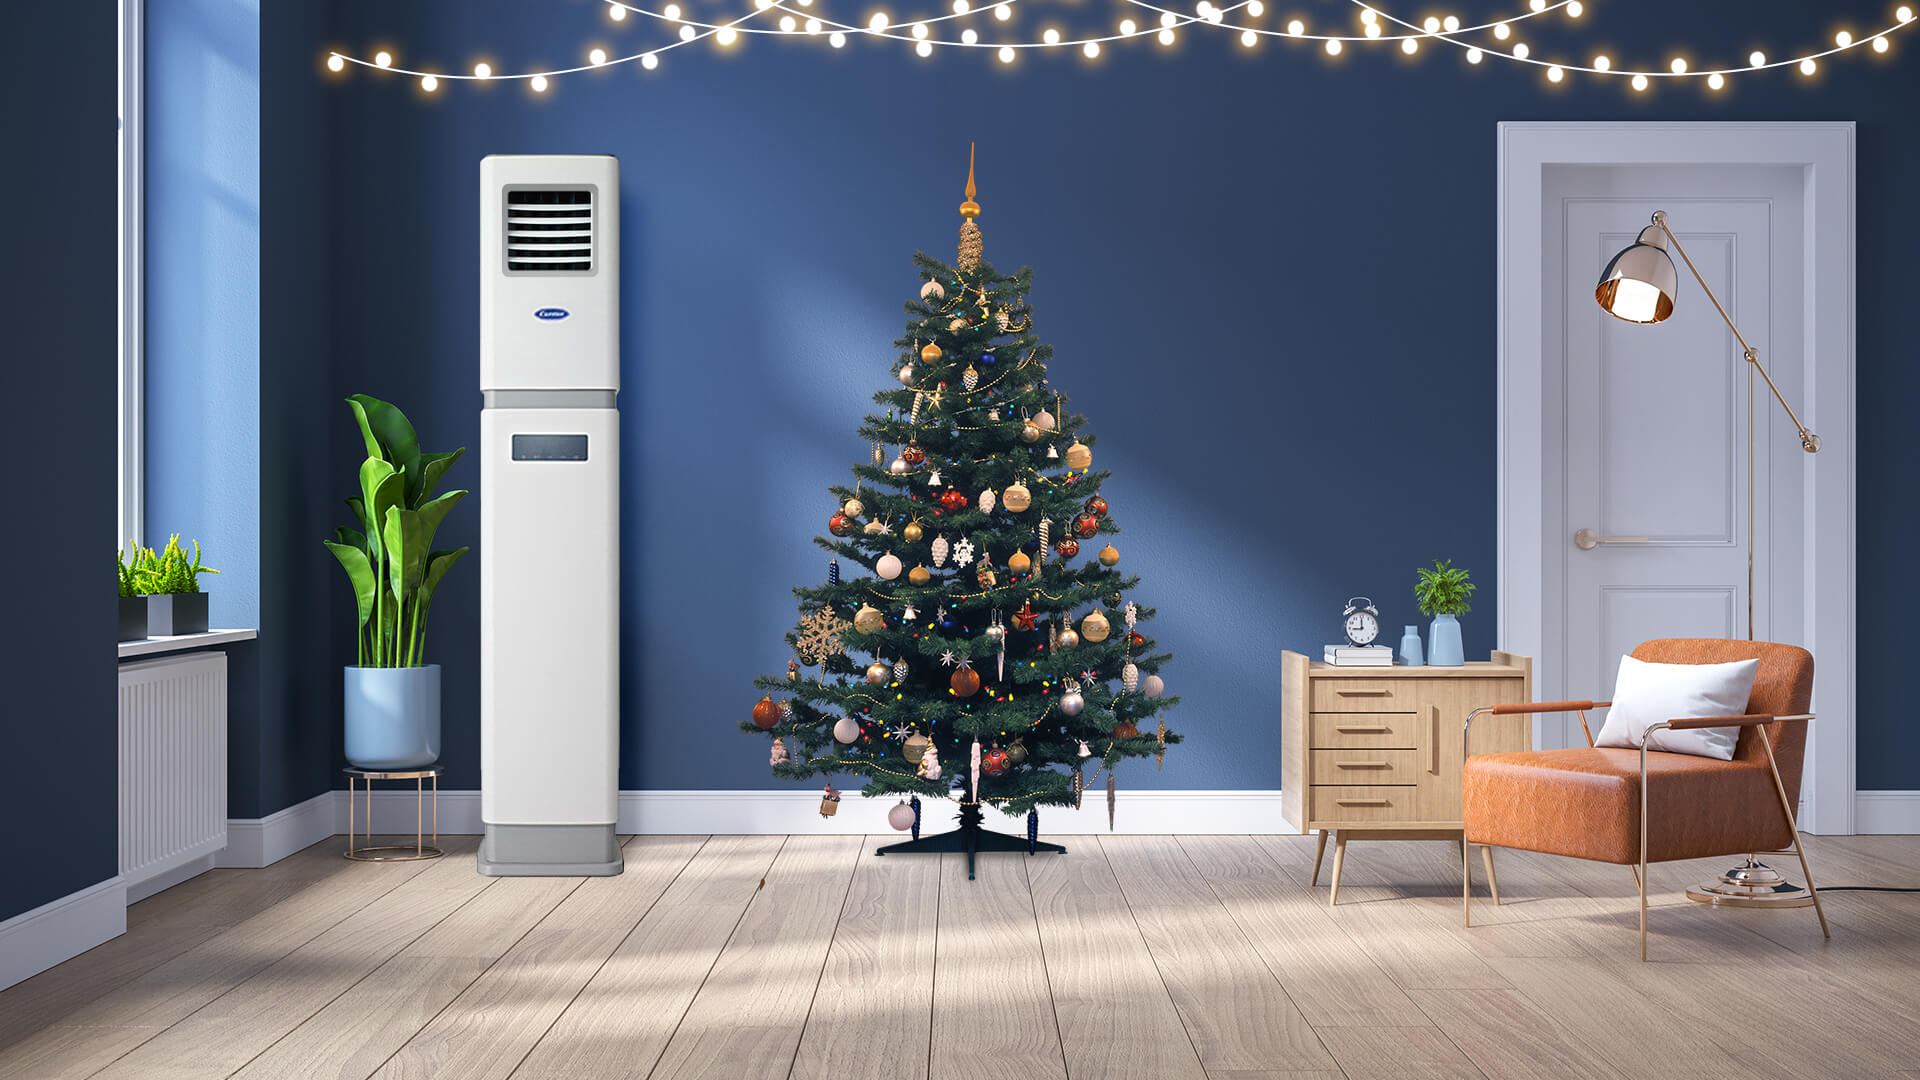 carrier-neo-aircon-in-a-christmas-styled-living-room